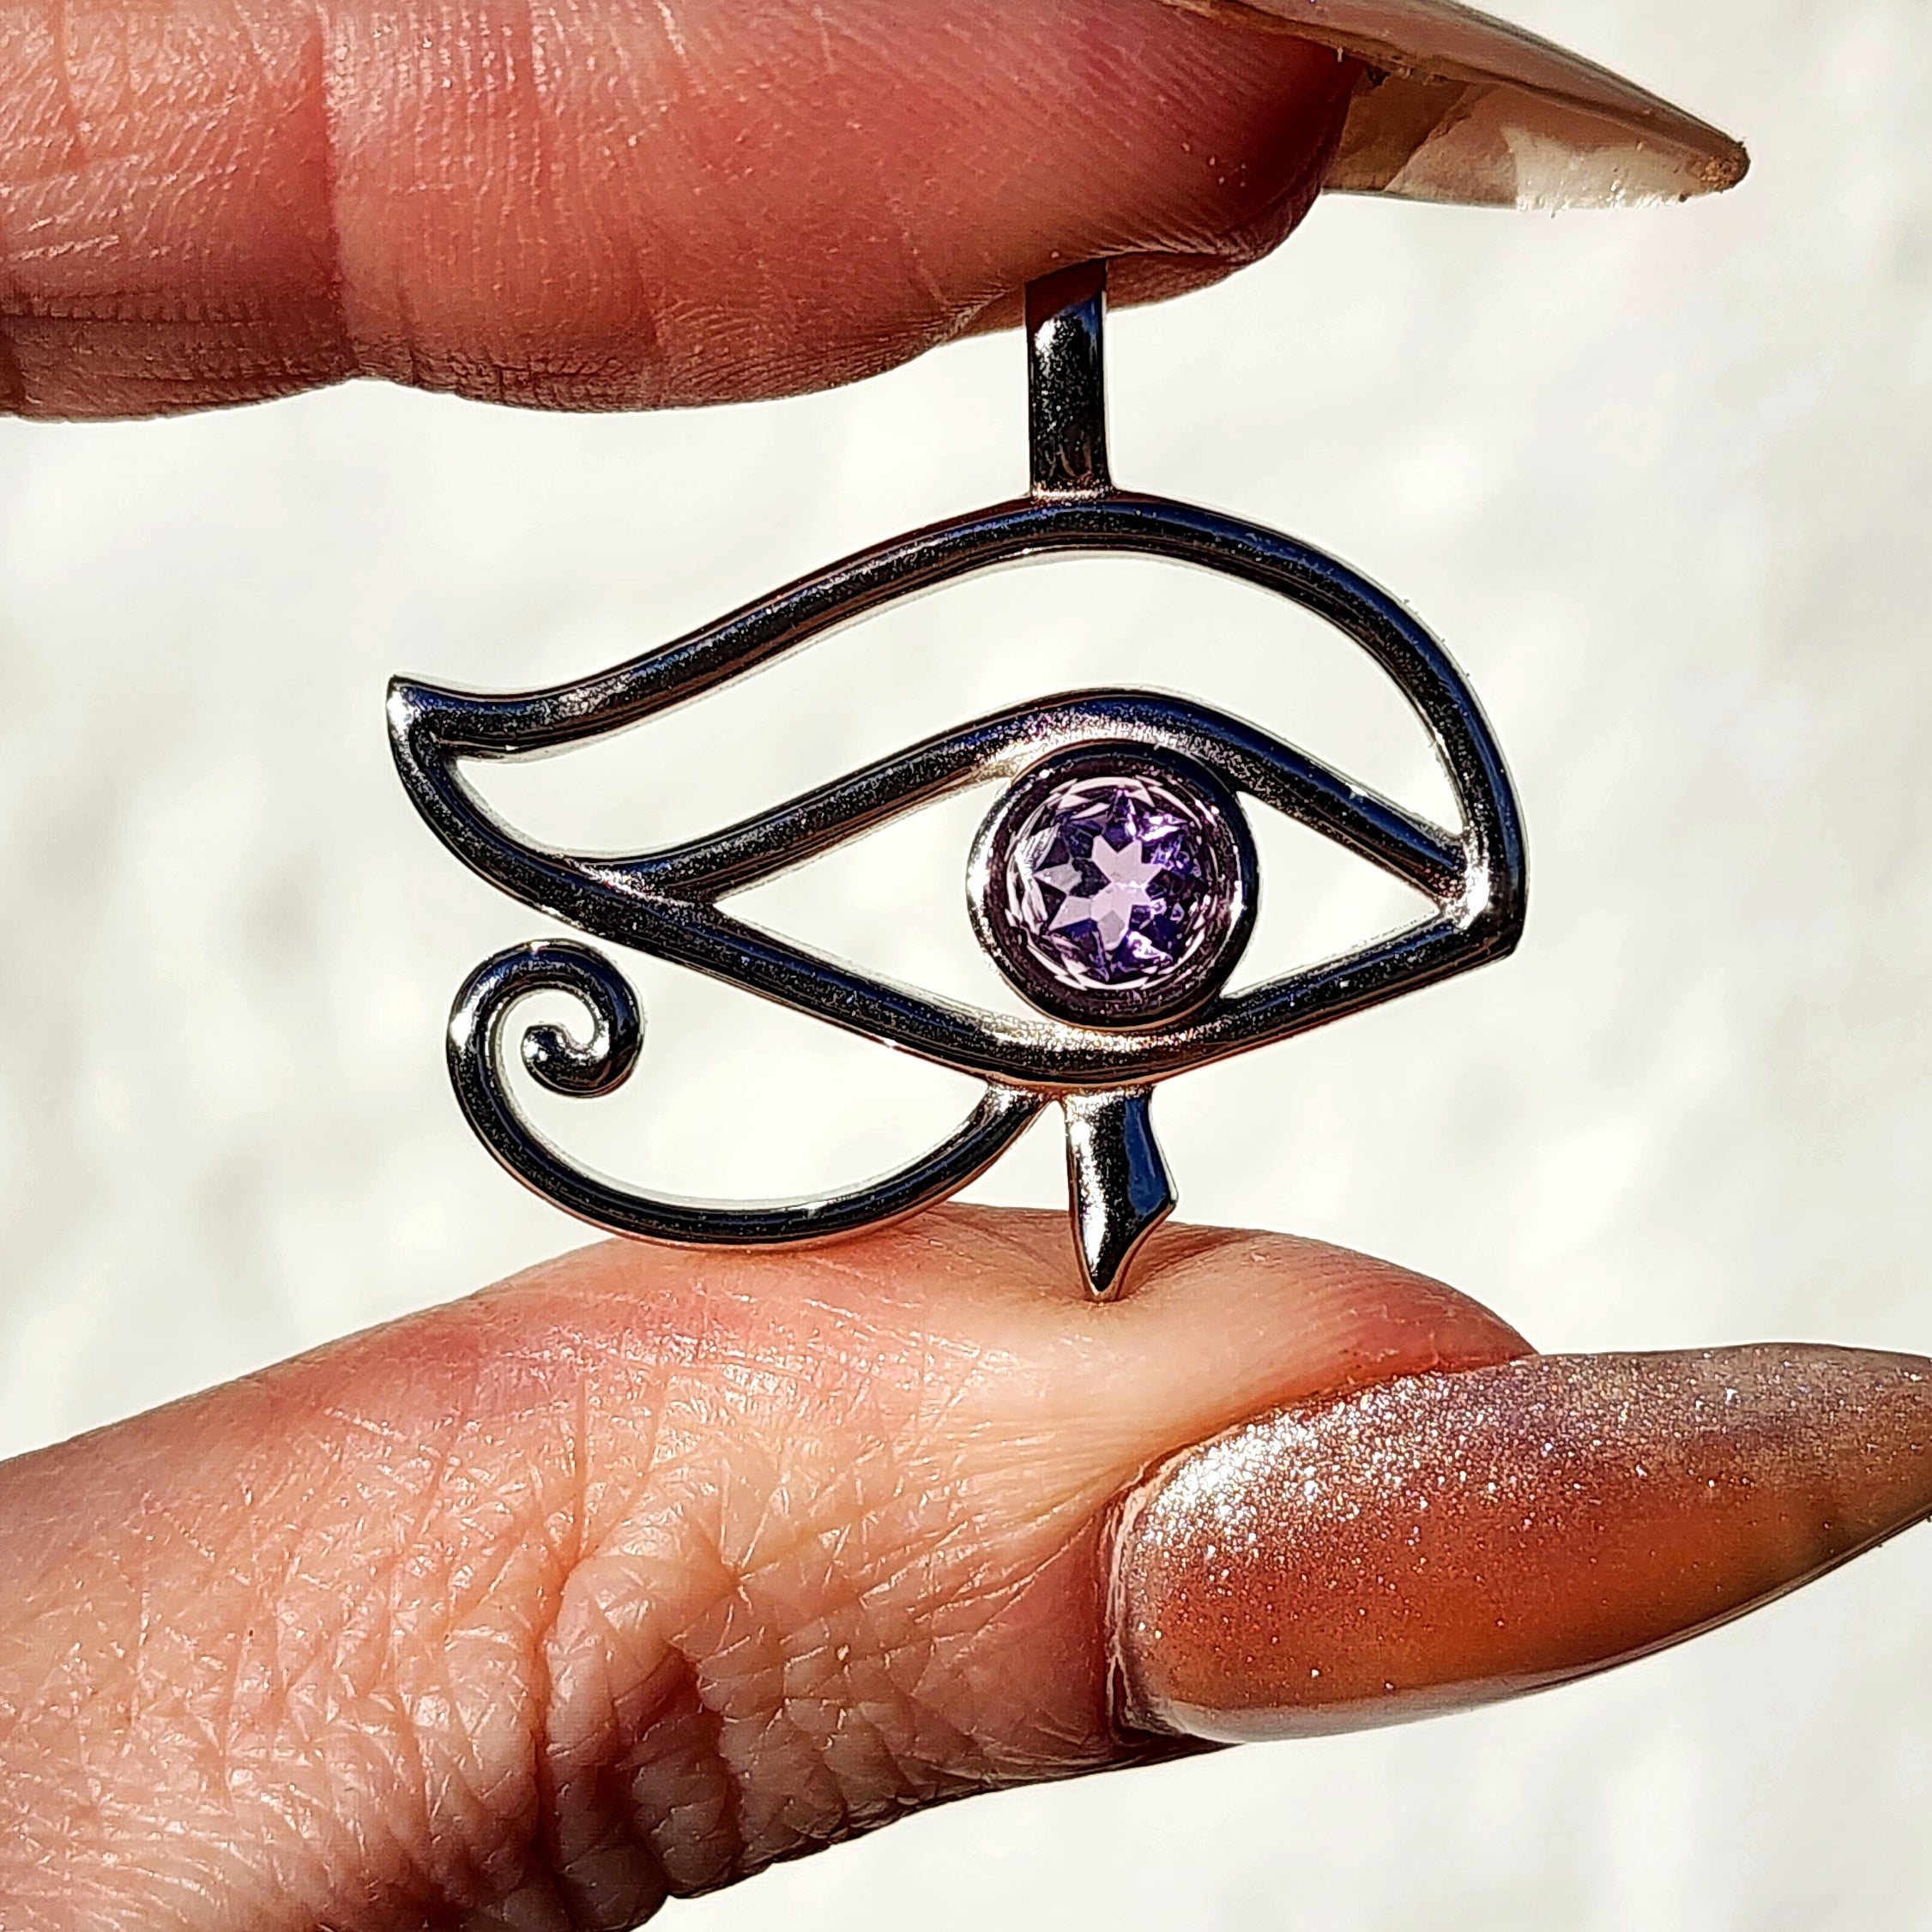 Amethyst Eye of Ra Amulet Pendant .925 Silver for Intuition, Luck, Protection and Purification